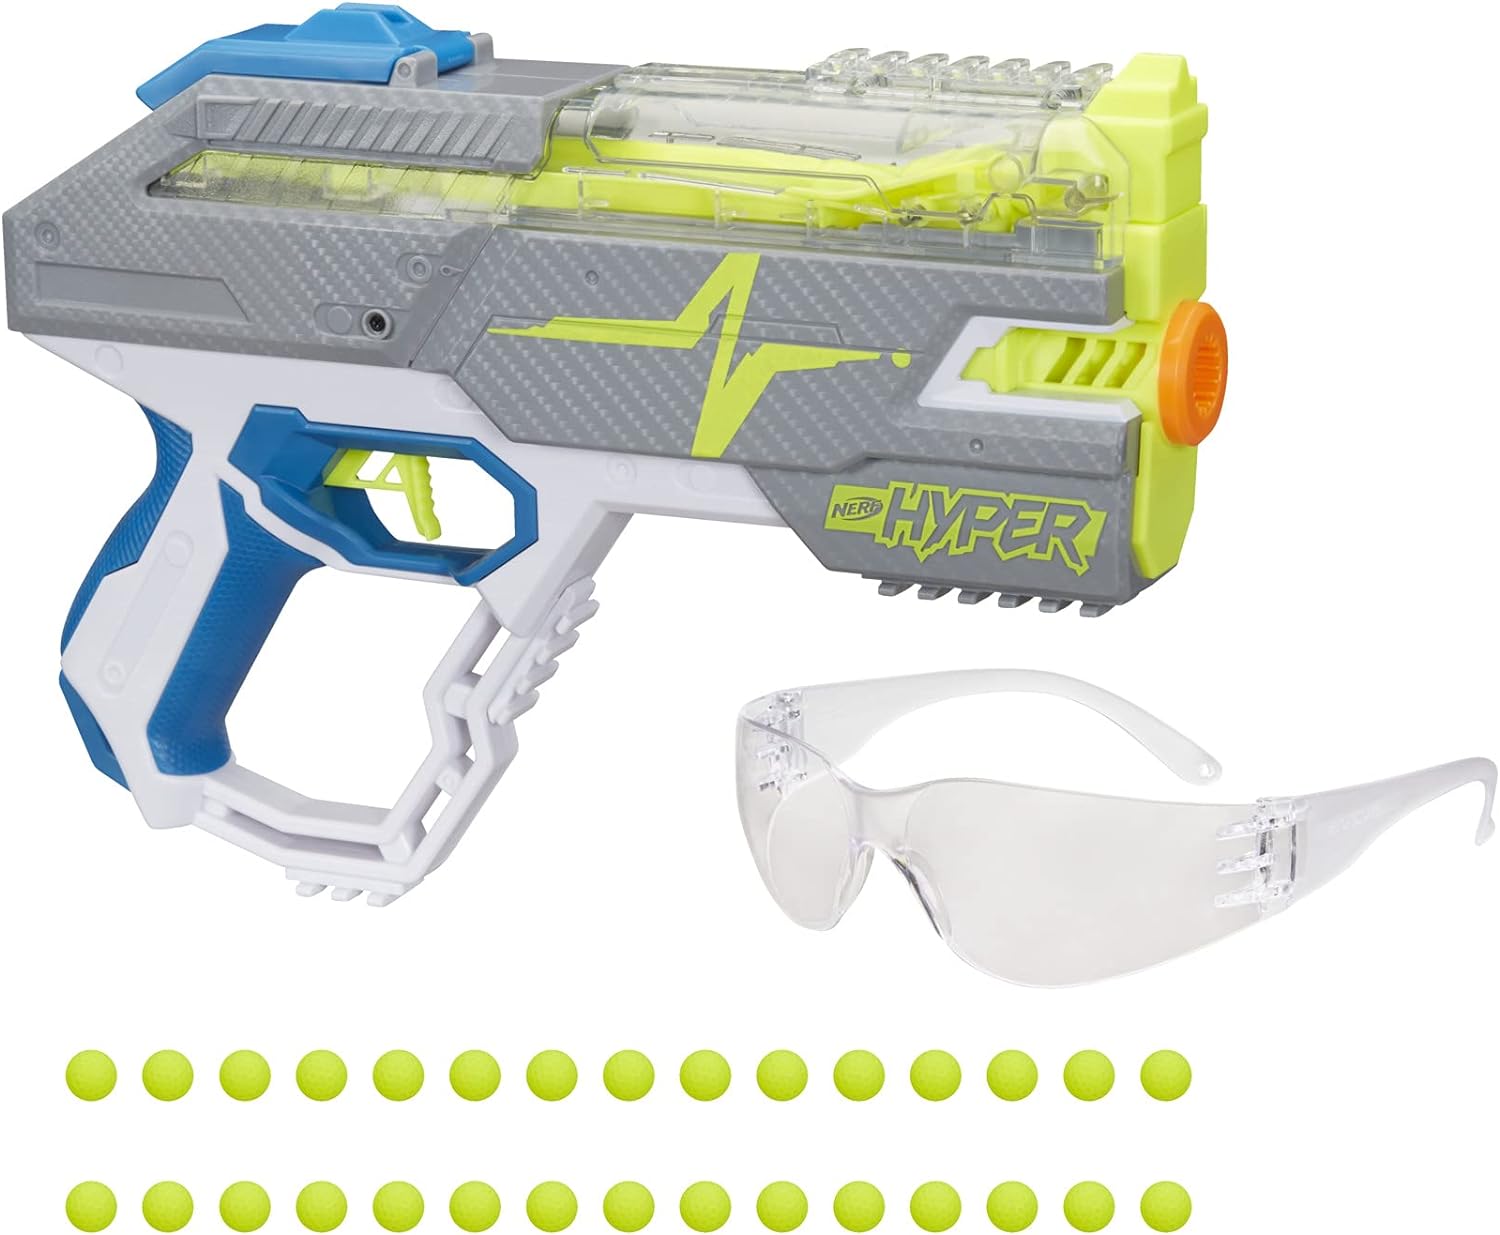 NERF Hyper Rush-40 Pump-Action Blaster, 30 Hyper Rounds, Eyewear, Up to 110 FPS Velocity, Easy Reload, Holds Up to 40 Rounds